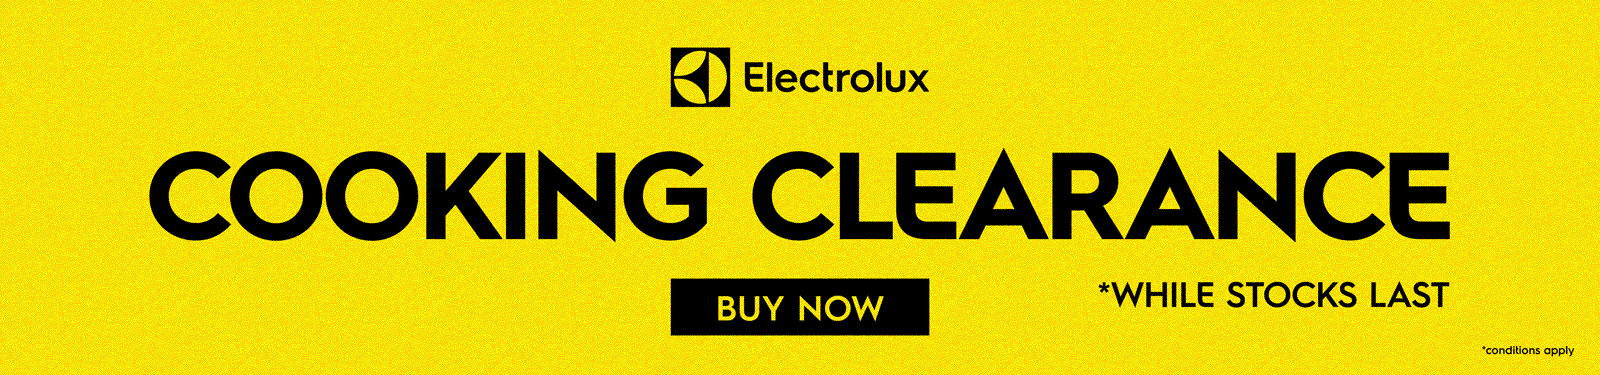 Electrolux Cooking Clearance at Retravision